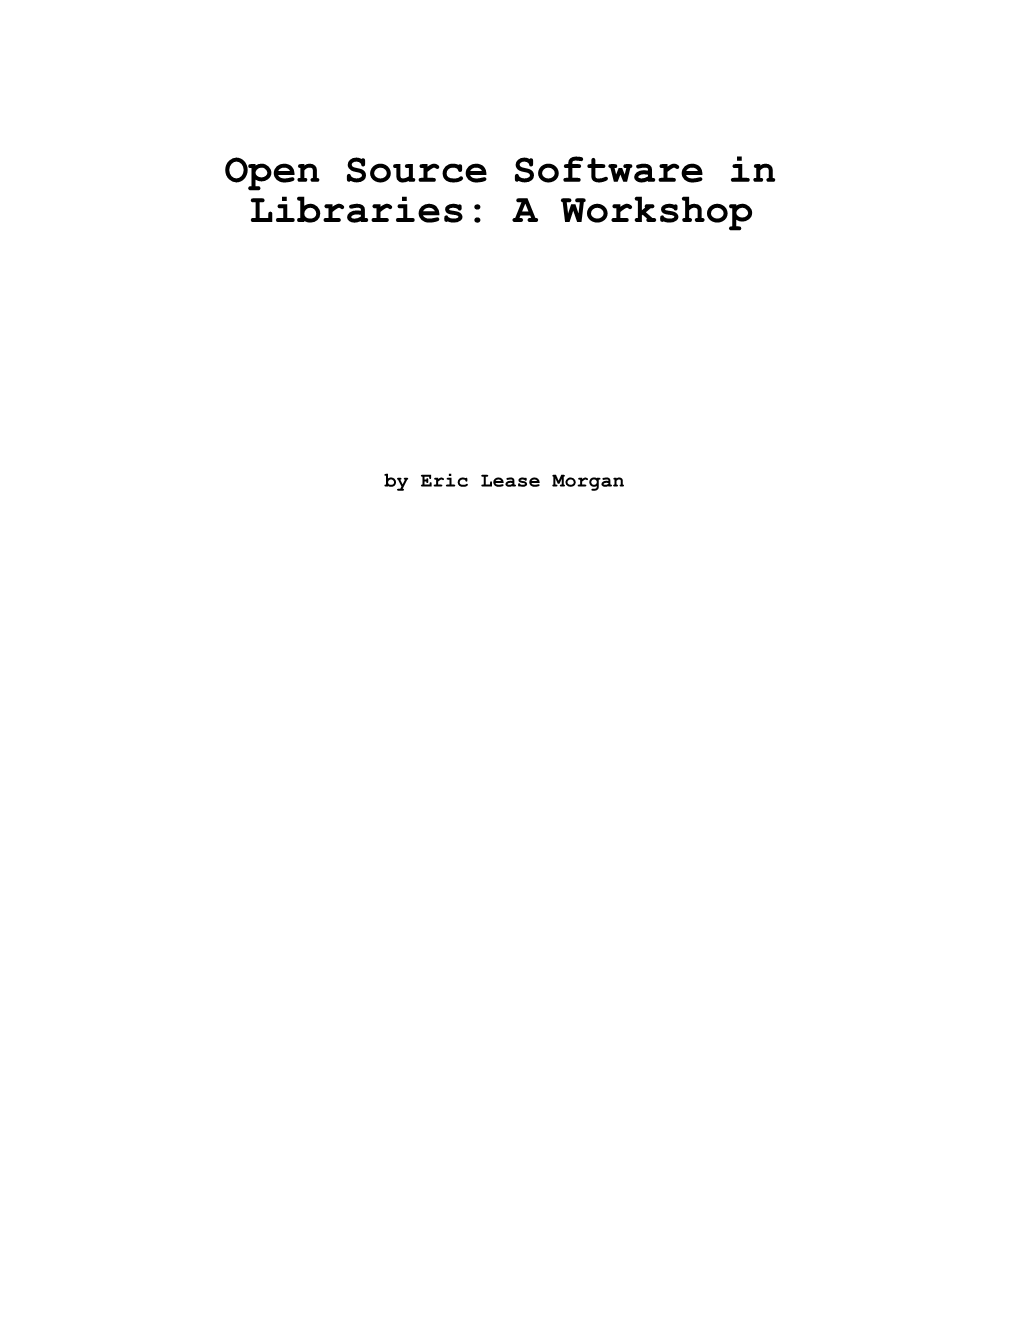 Open Source Software in Libraries: a Workshop